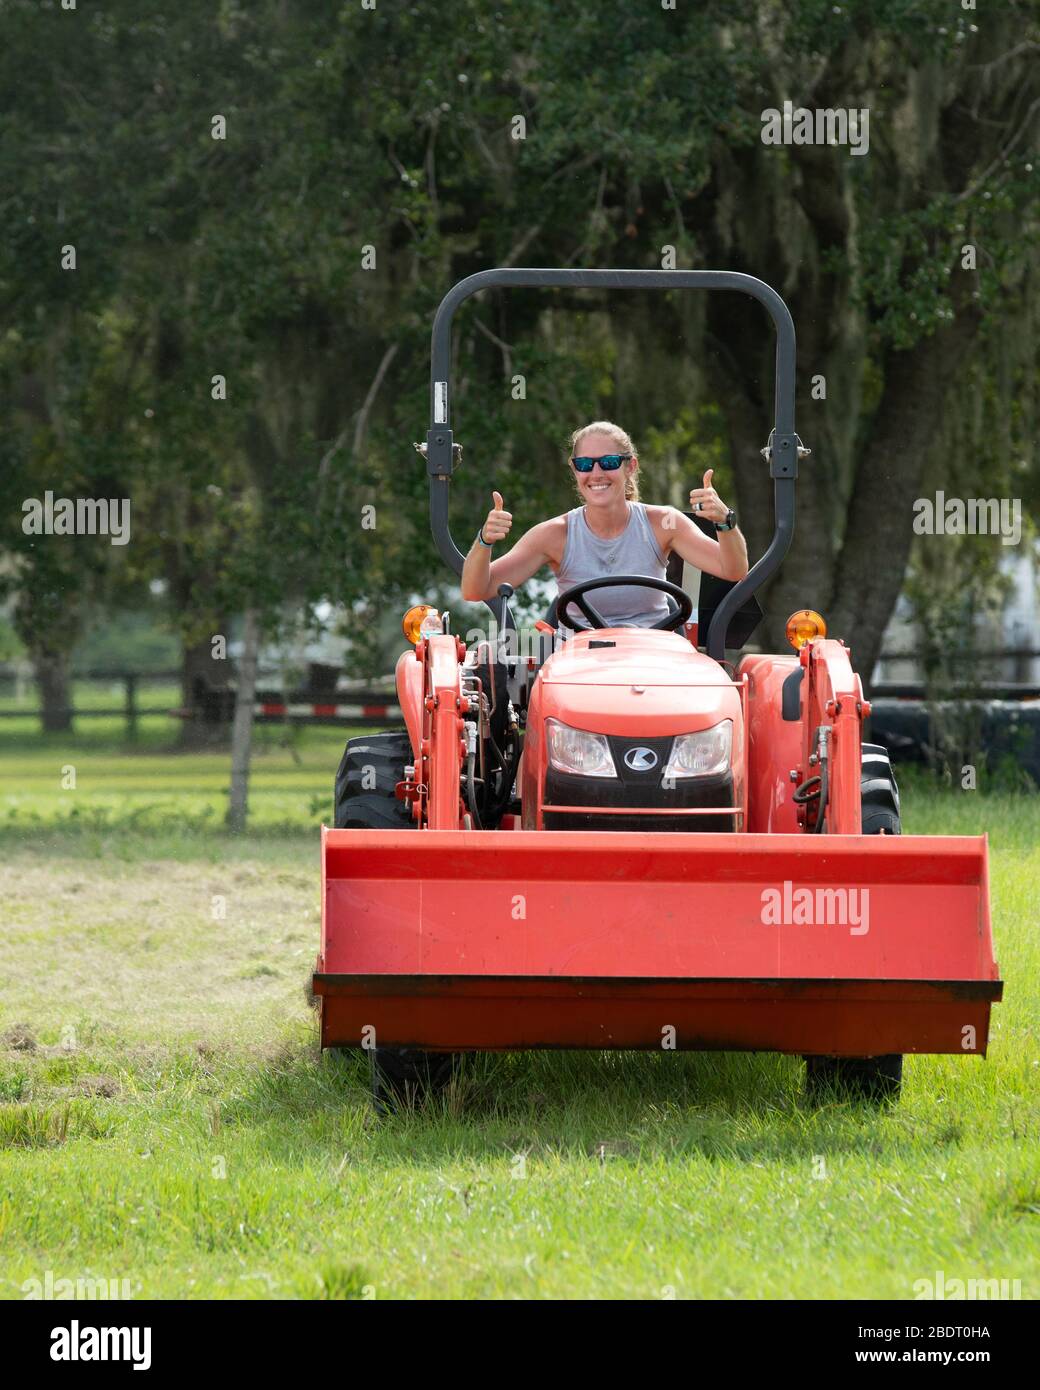 Blond woman driving a tractor mowing a pasture.  The image is straight on.  She is smiling and giving two thumbs up sign. Stock Photo